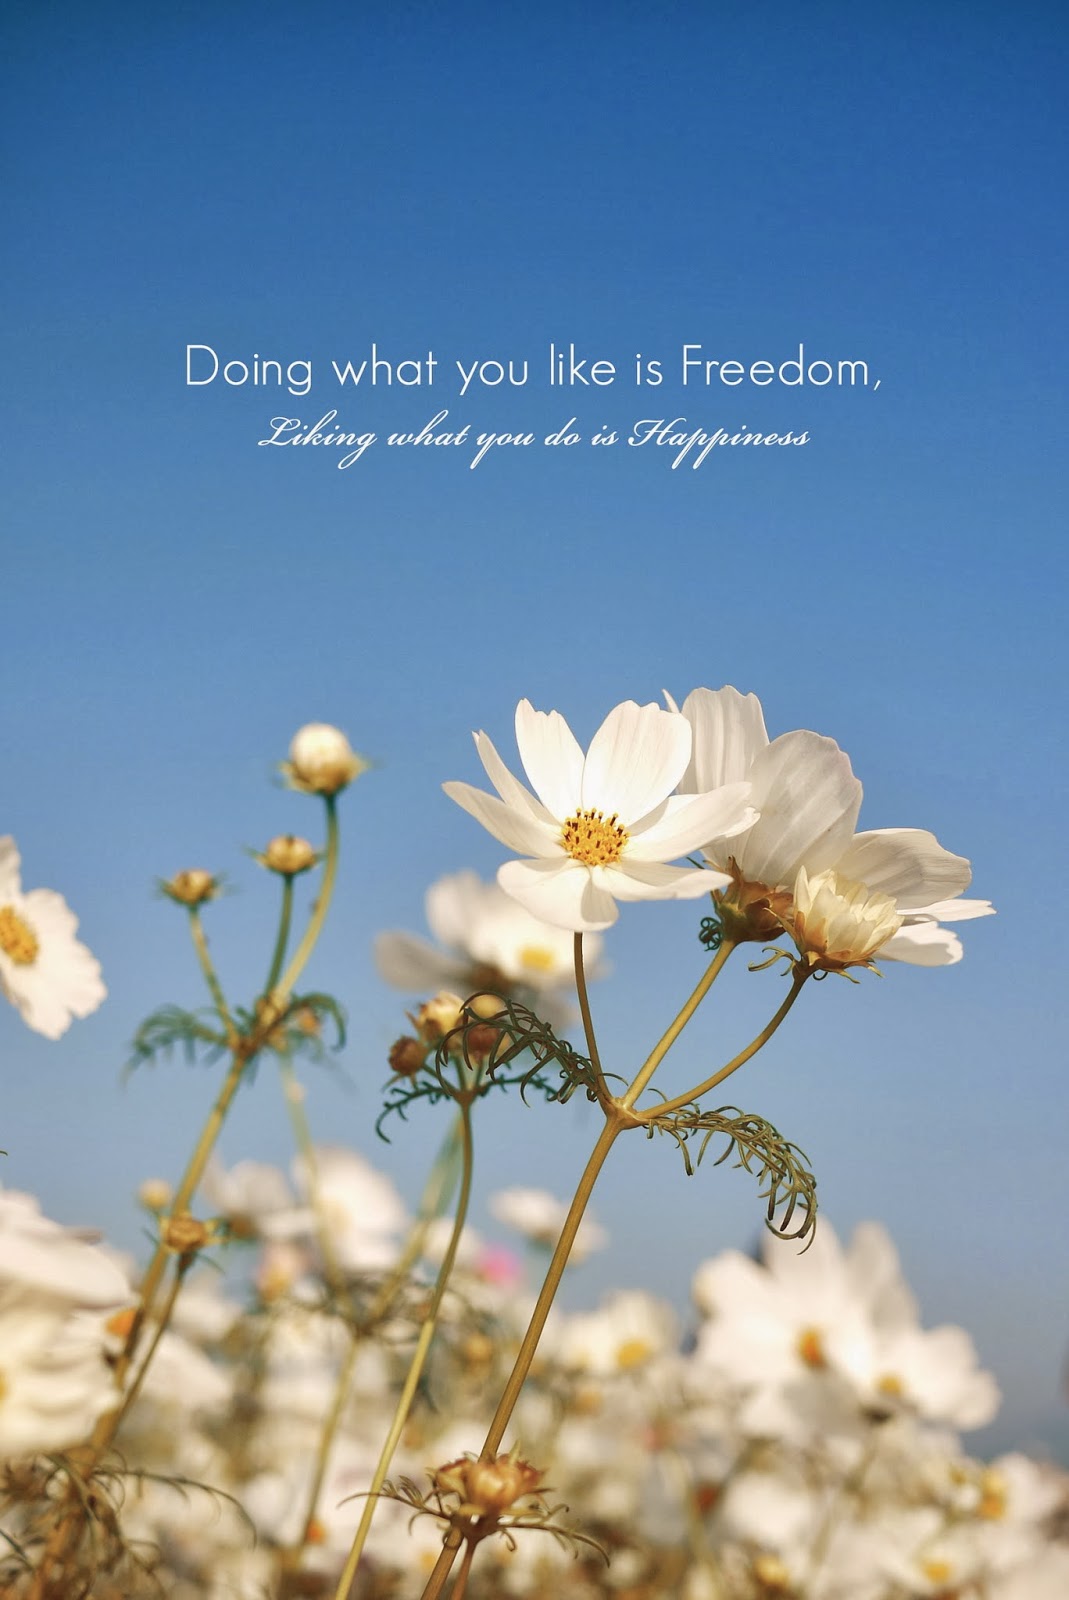 doing what you like is freedom, liking what you do is happiness.